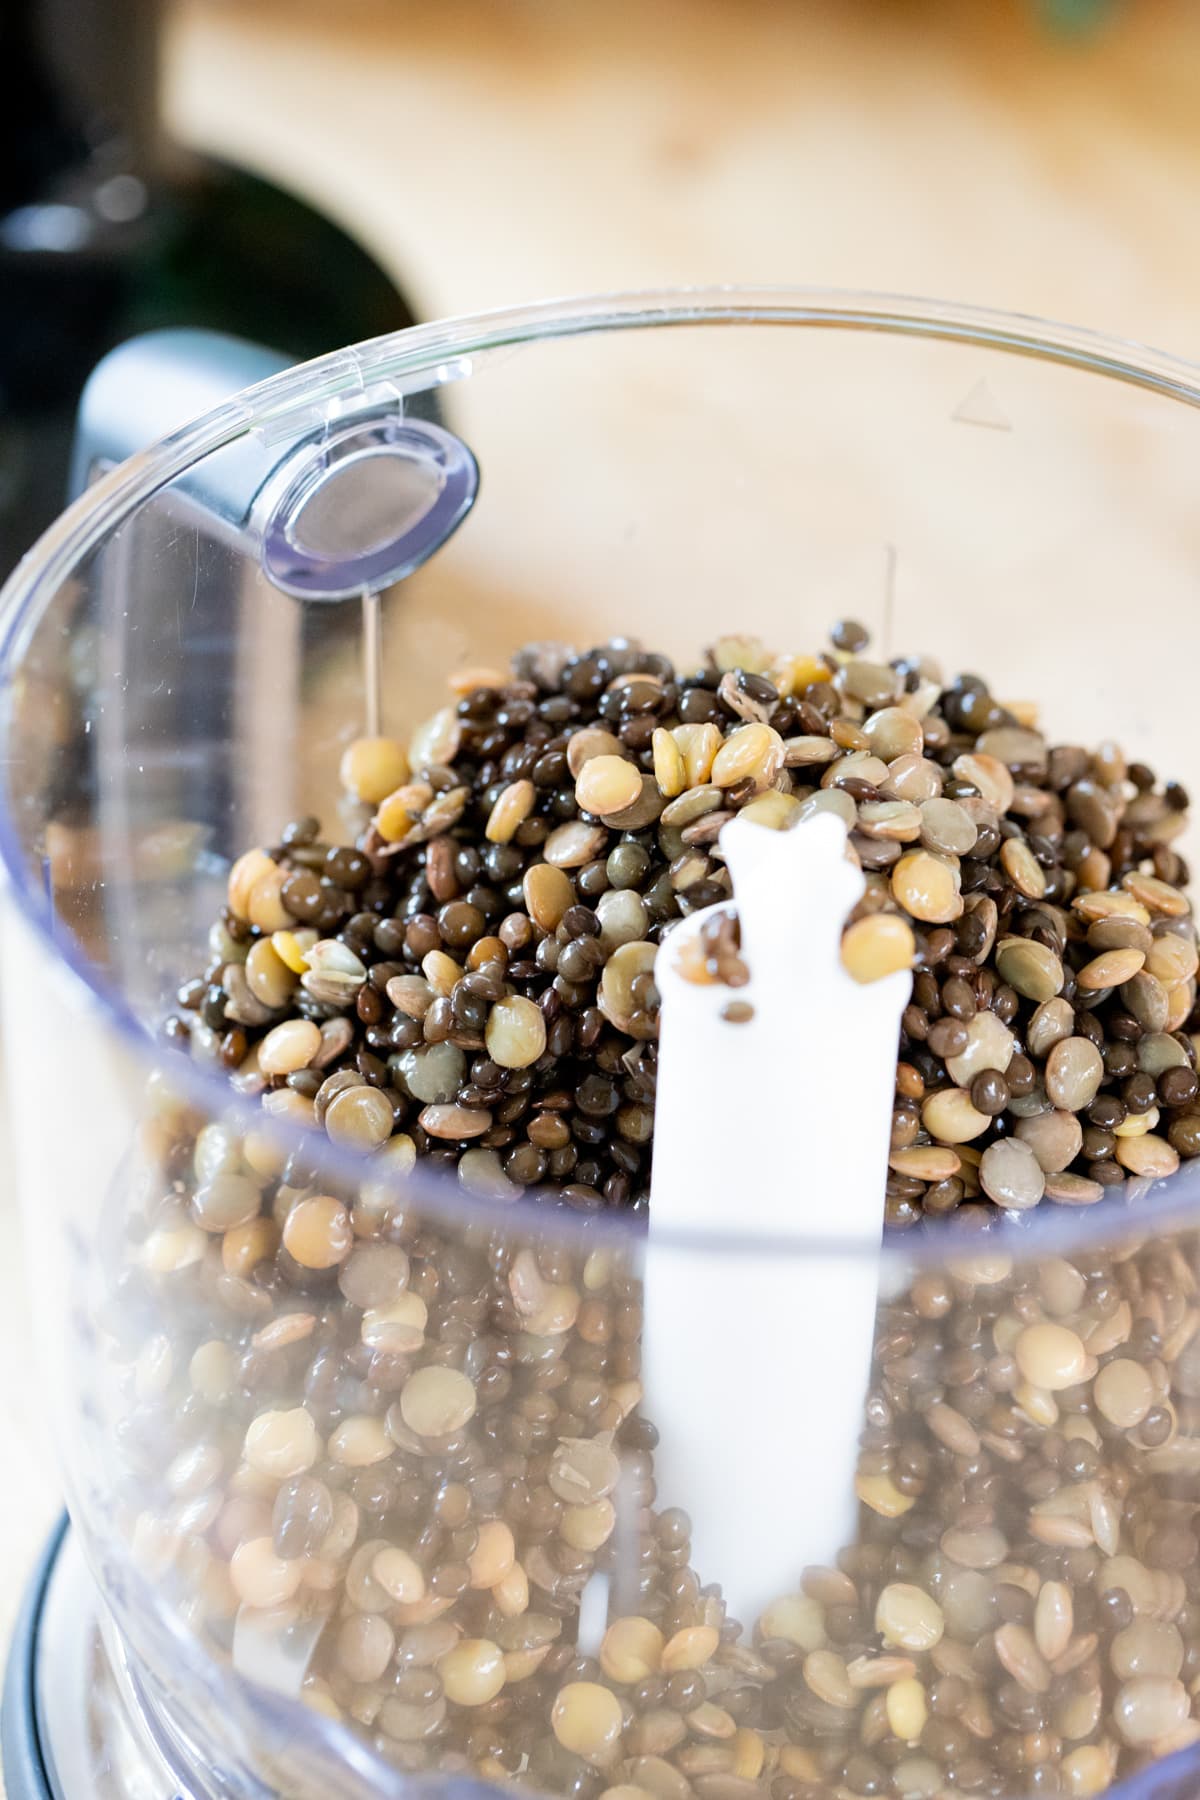 add lentils to the bowl of the food processor